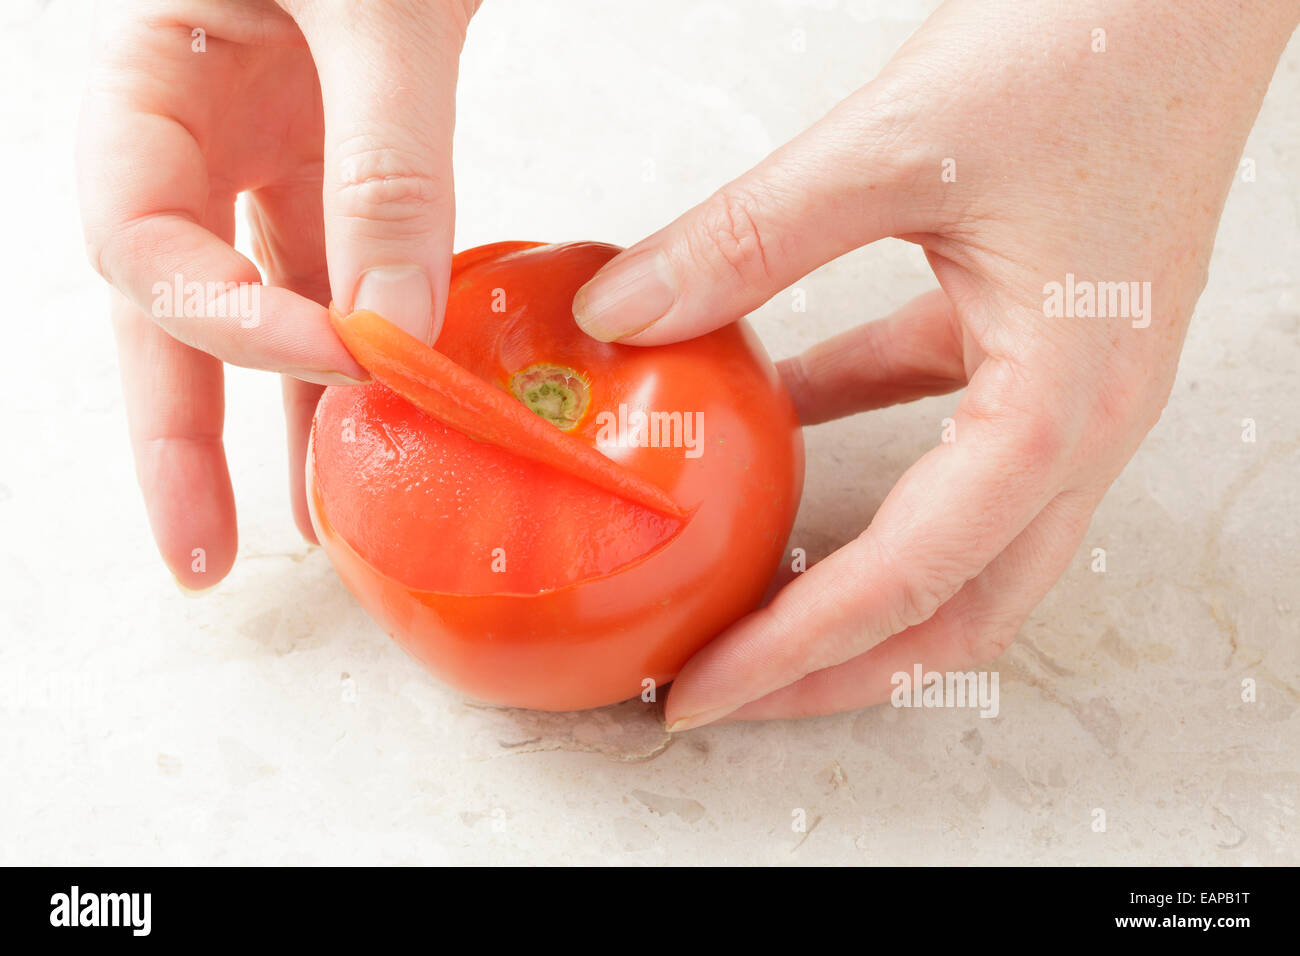 Hands removing skin from a tomato Stock Photo